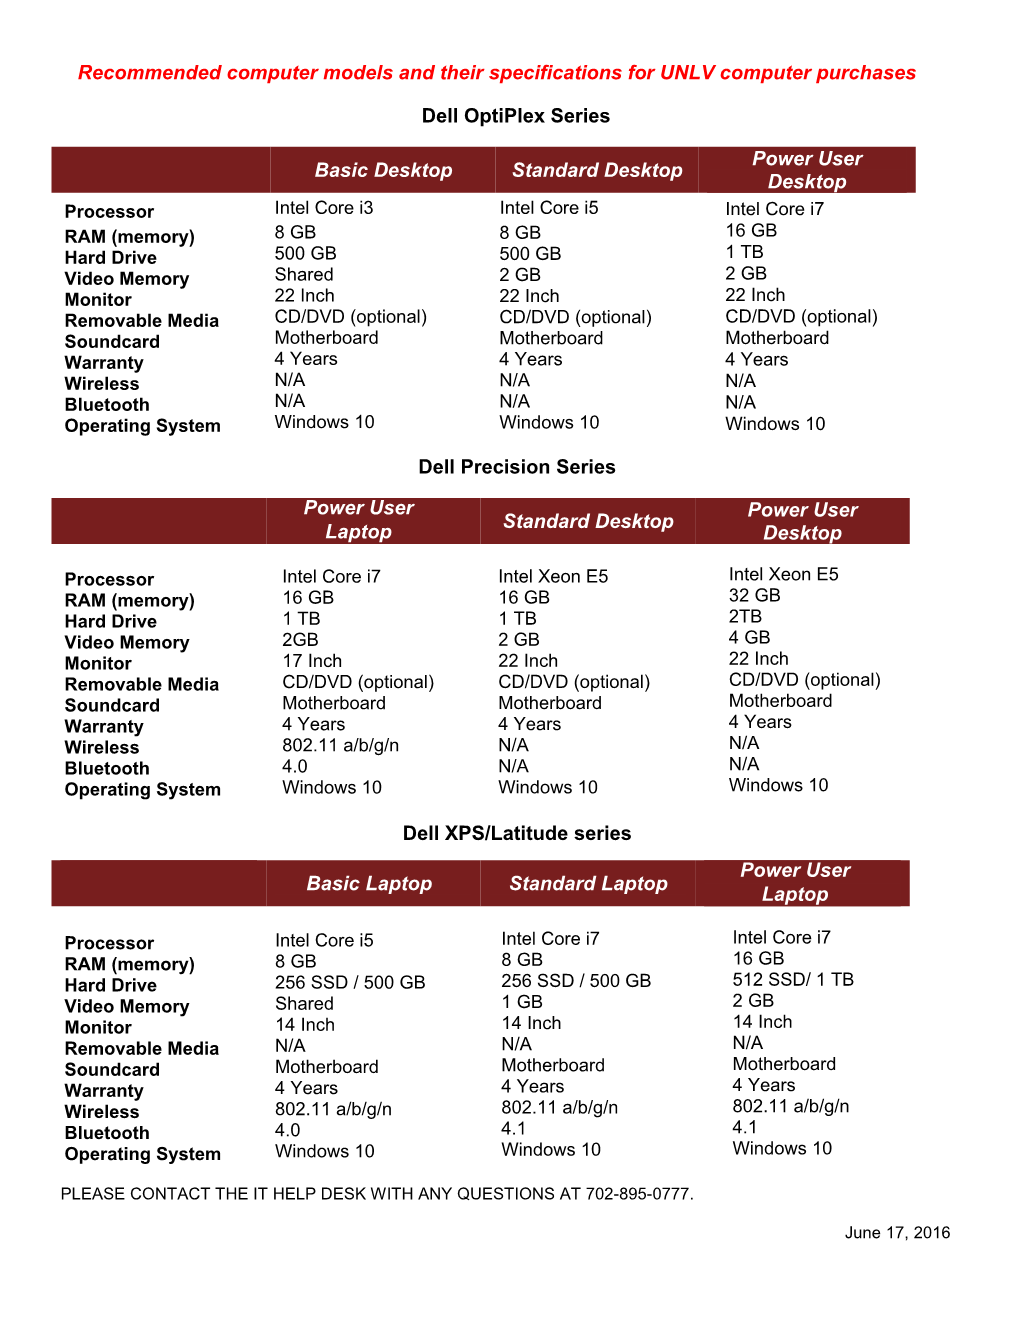 Recommended Computer Models and Their Specifications for UNLV Computer Purchases